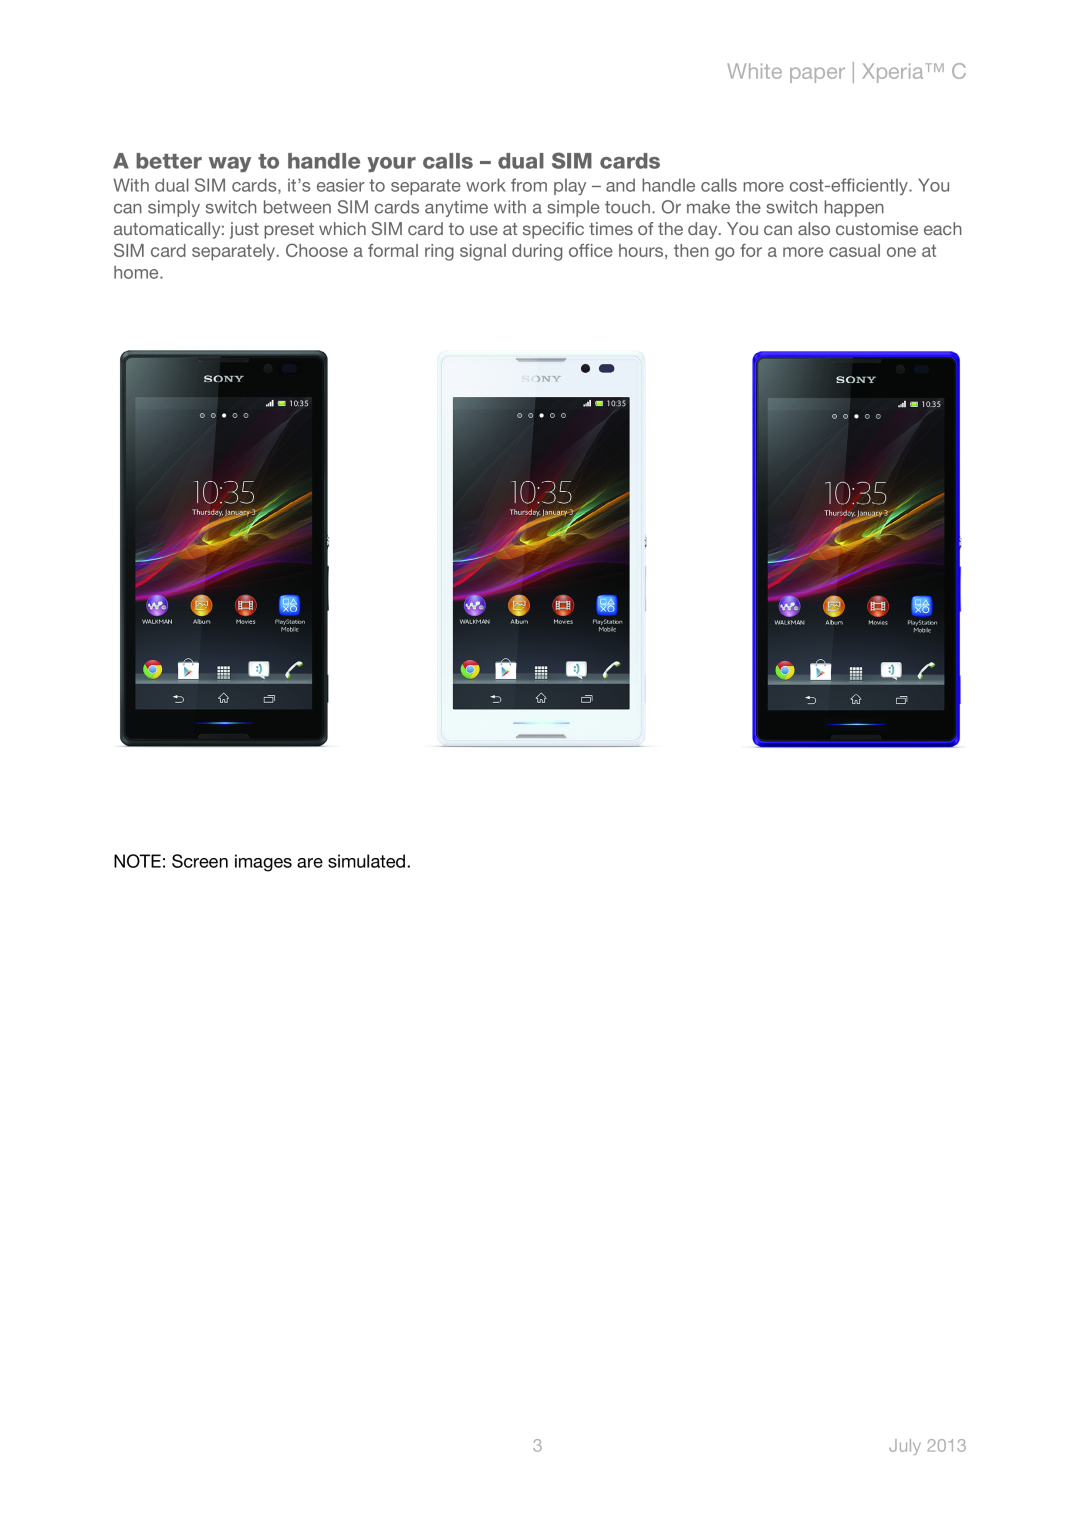 Sony s39h A better way to handle your calls - dual SIM cards, White paper Xperia C, NOTE Screen images are simulated, July 